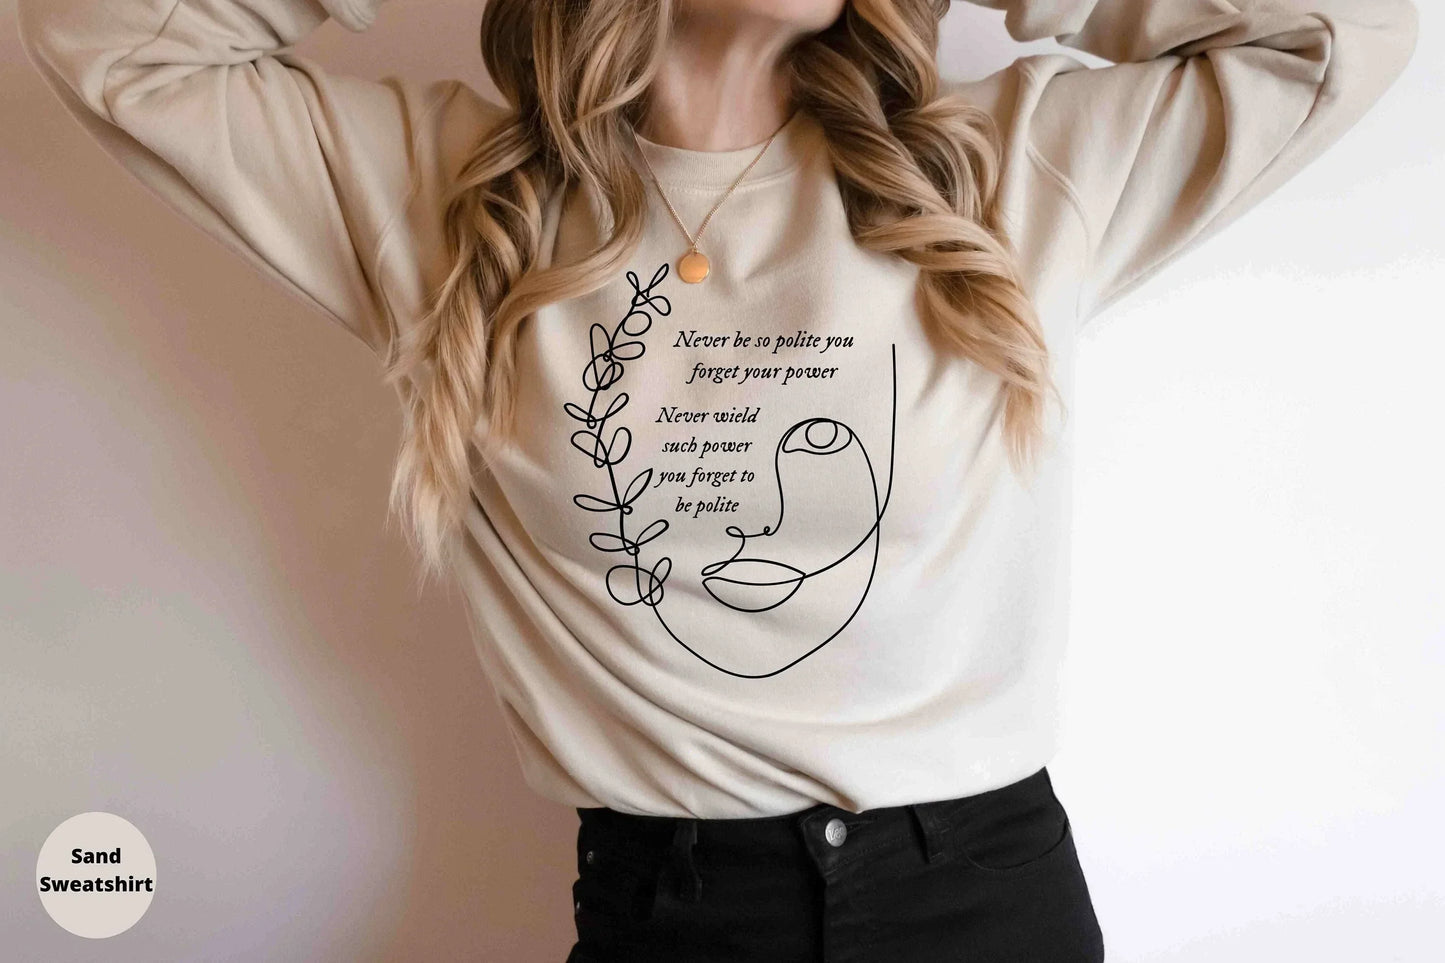 Taylor Line Art Shirt, Minimalist Sweatshirt, Fall Crewneck, Mindset Sweater, Never Forget Your Power and Remain Polite, Gift for Teenager